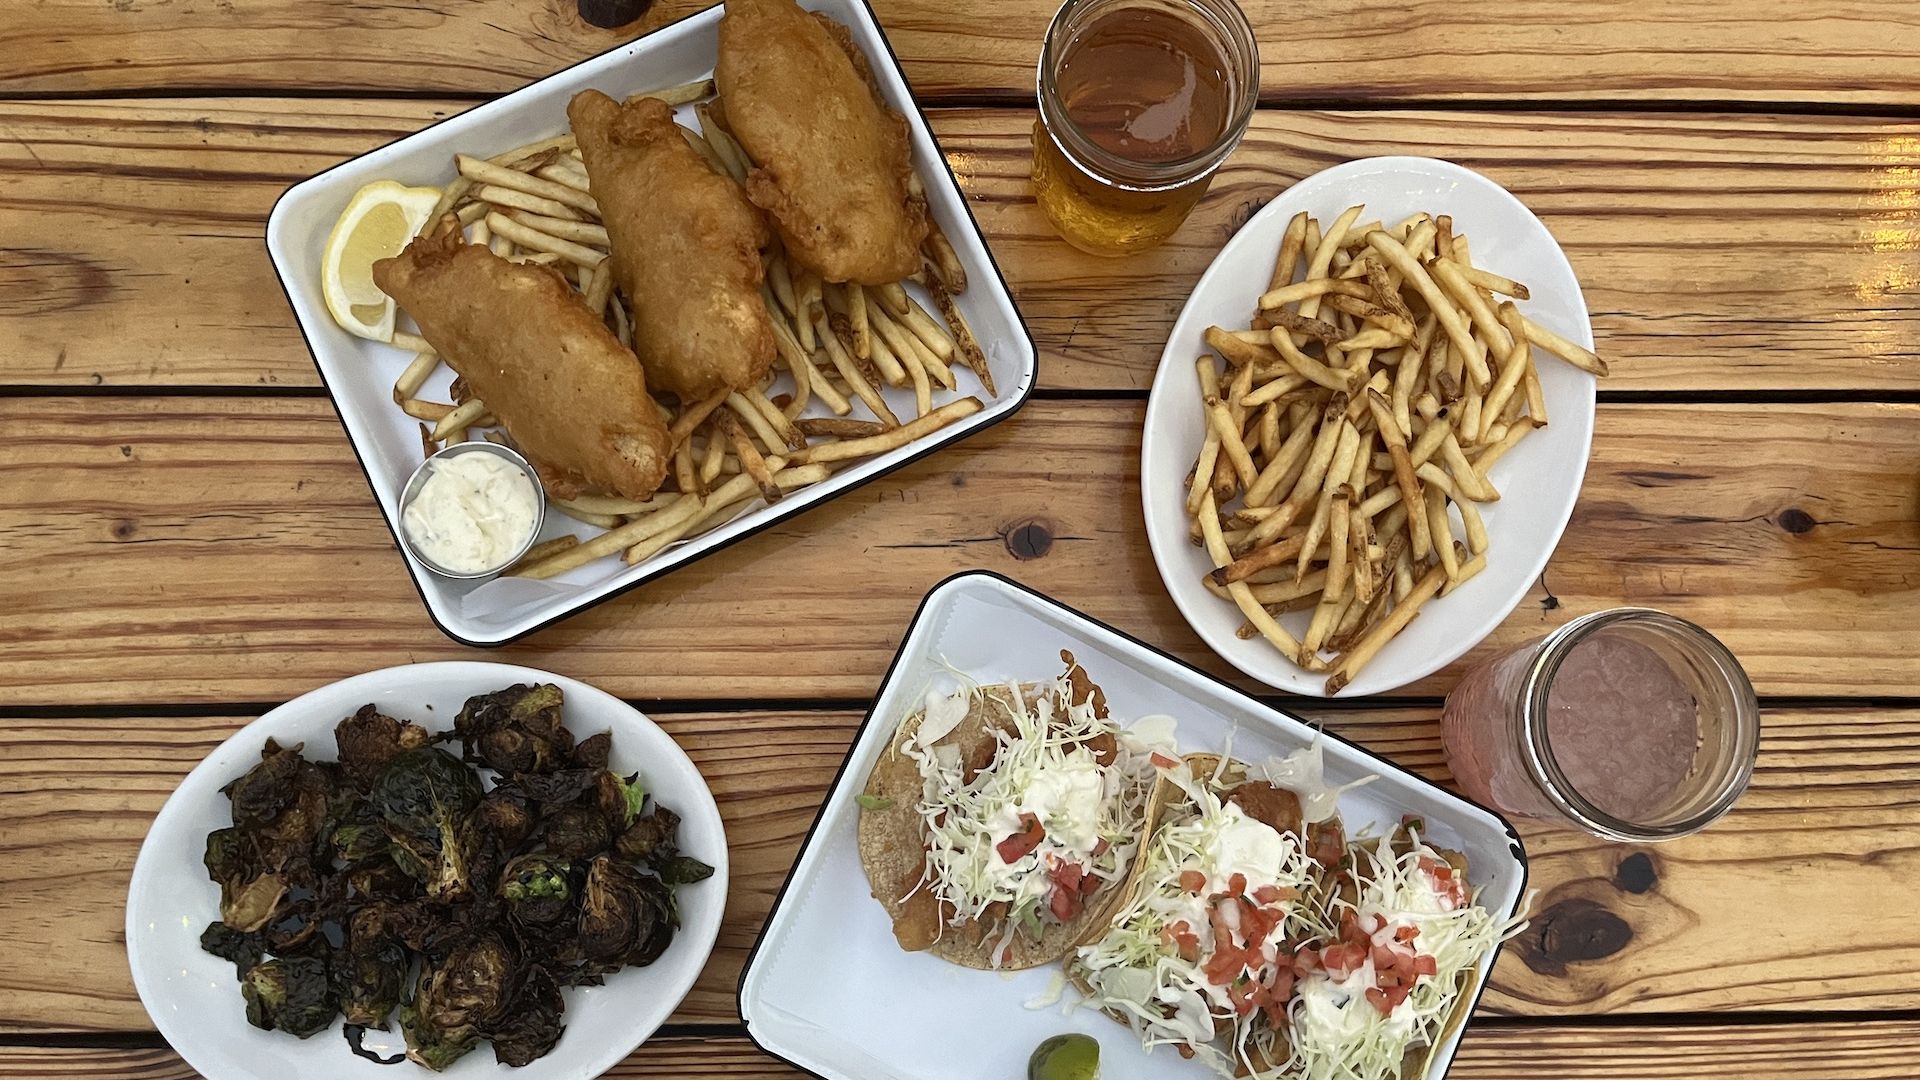 Plates of fish and chips, brussels sprouts, baja fish tacos and fries with two drink on a picnic table.